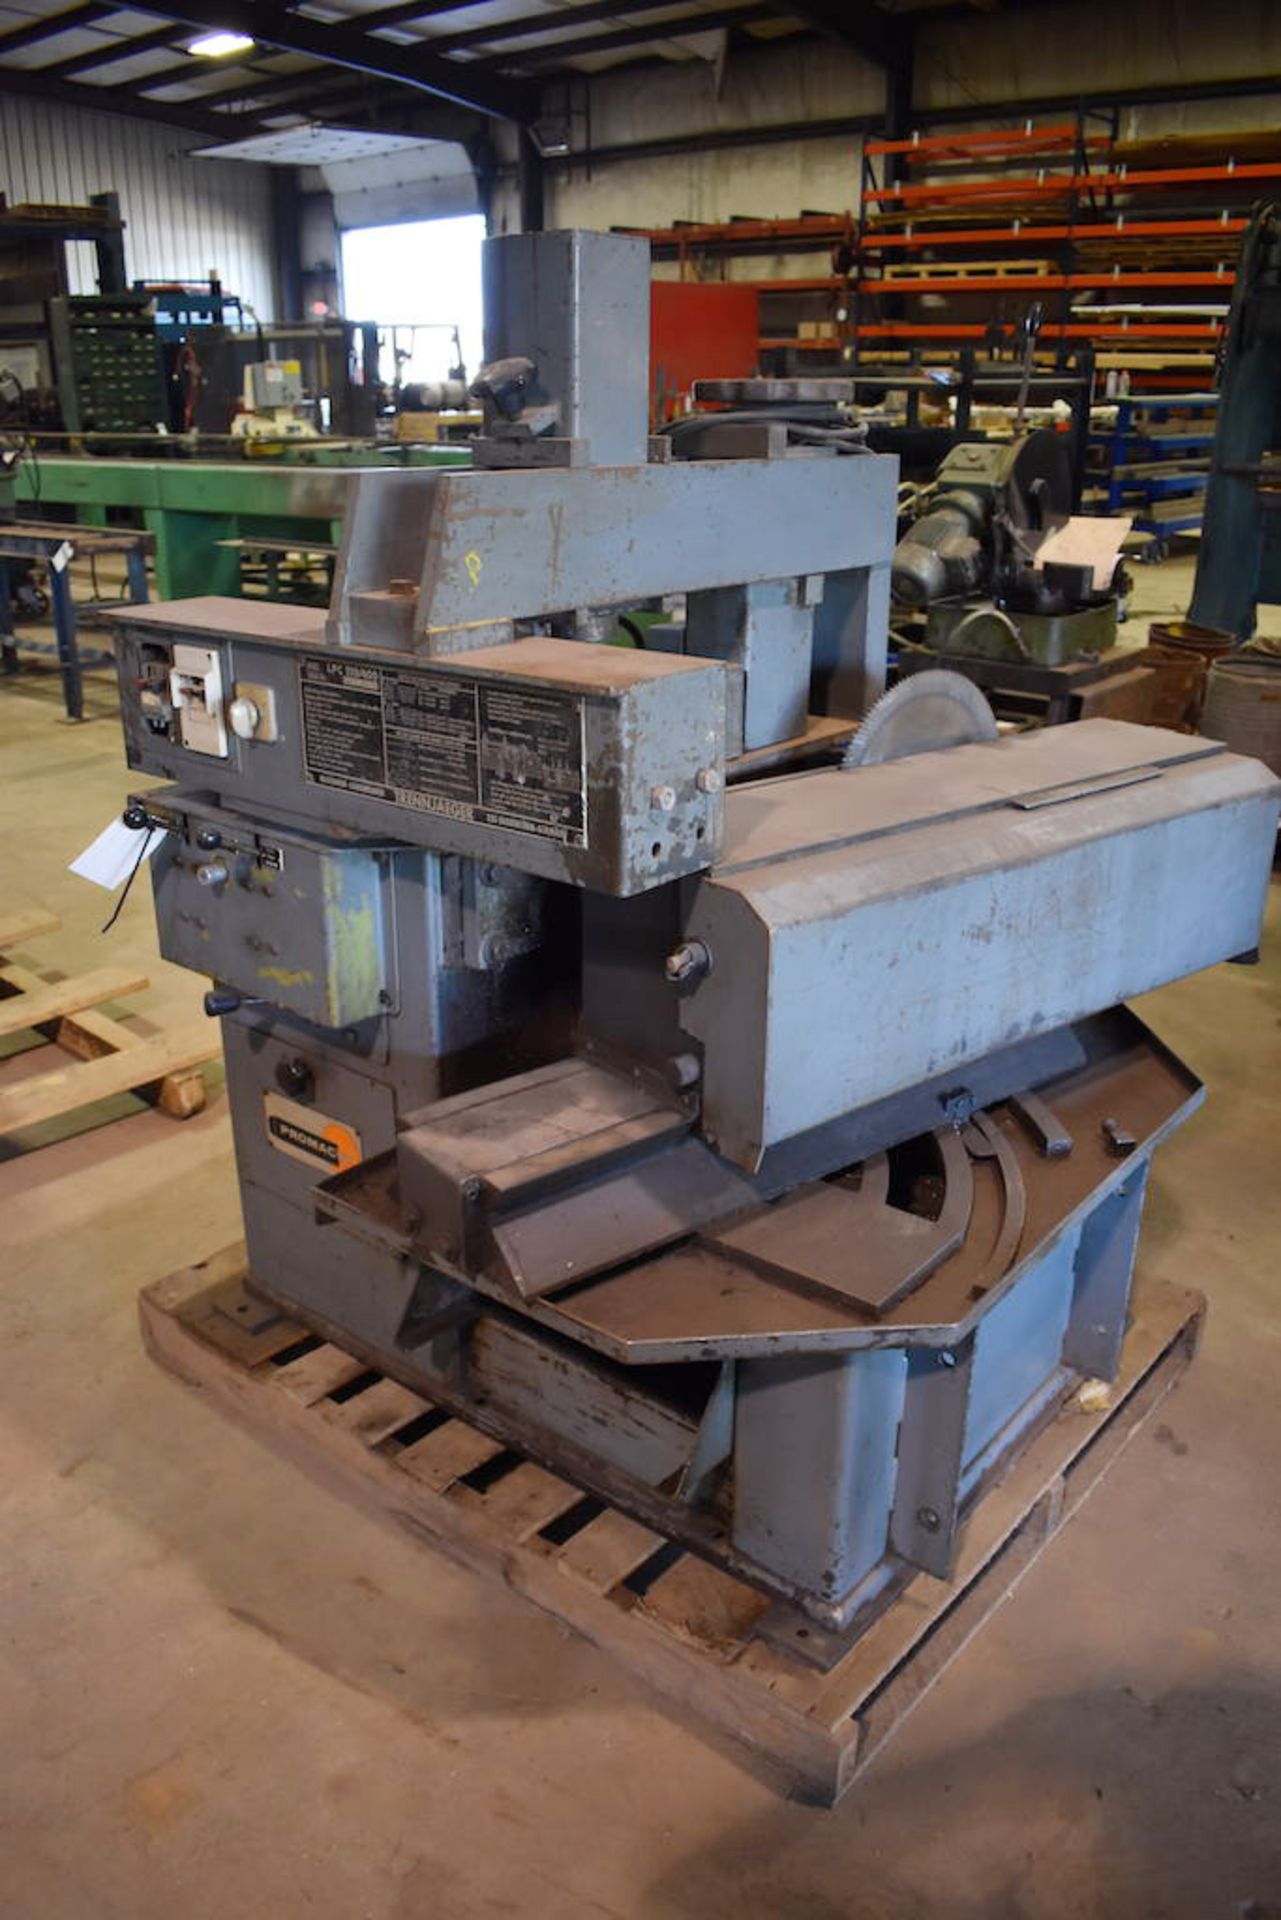 14” Tennjaeger Promecut LPC110/400 Cold Saw, Hydraulic Vise, Hydraulic Vertical Material Hold - Image 2 of 4